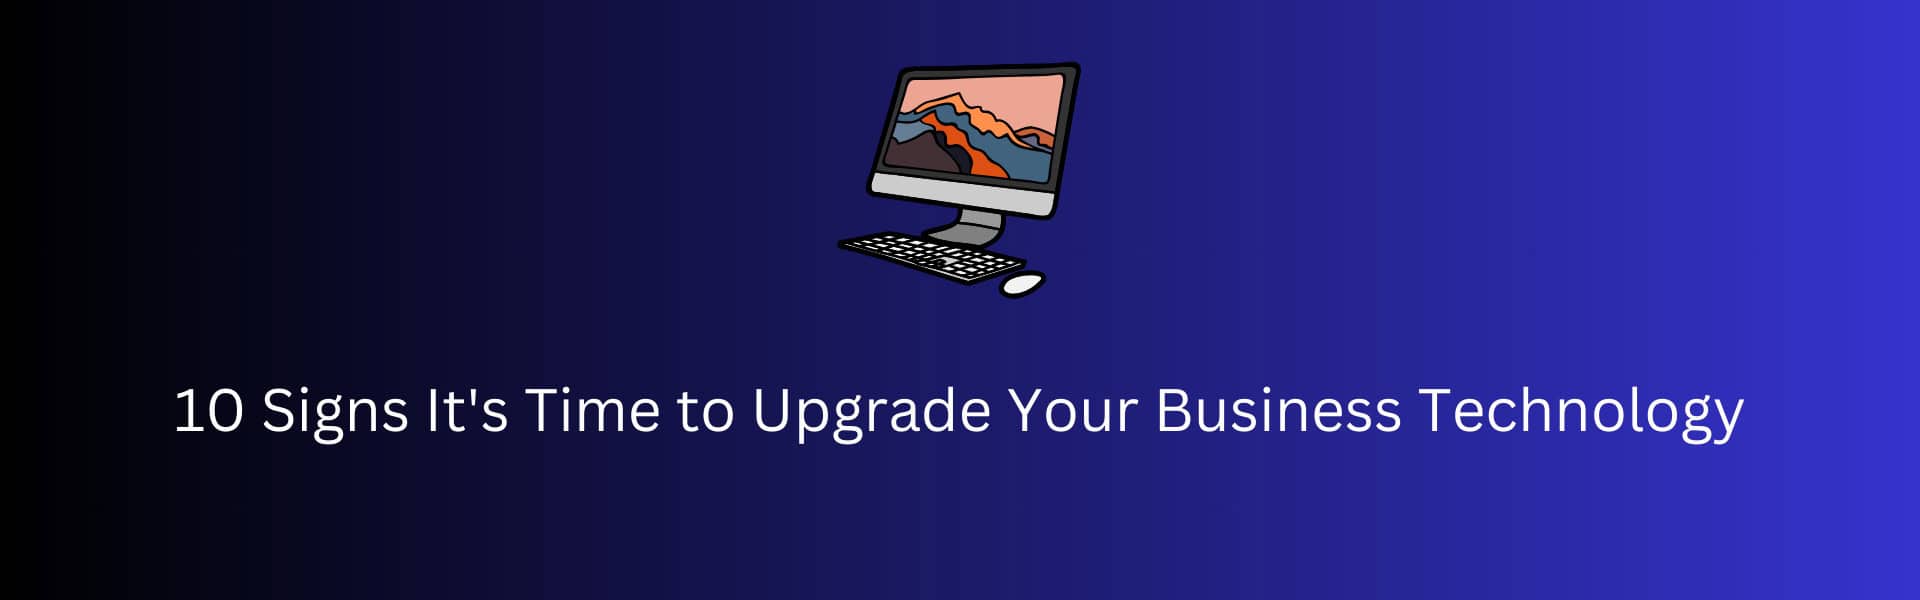 10 Signs It’s Time to Upgrade Your Business Technology